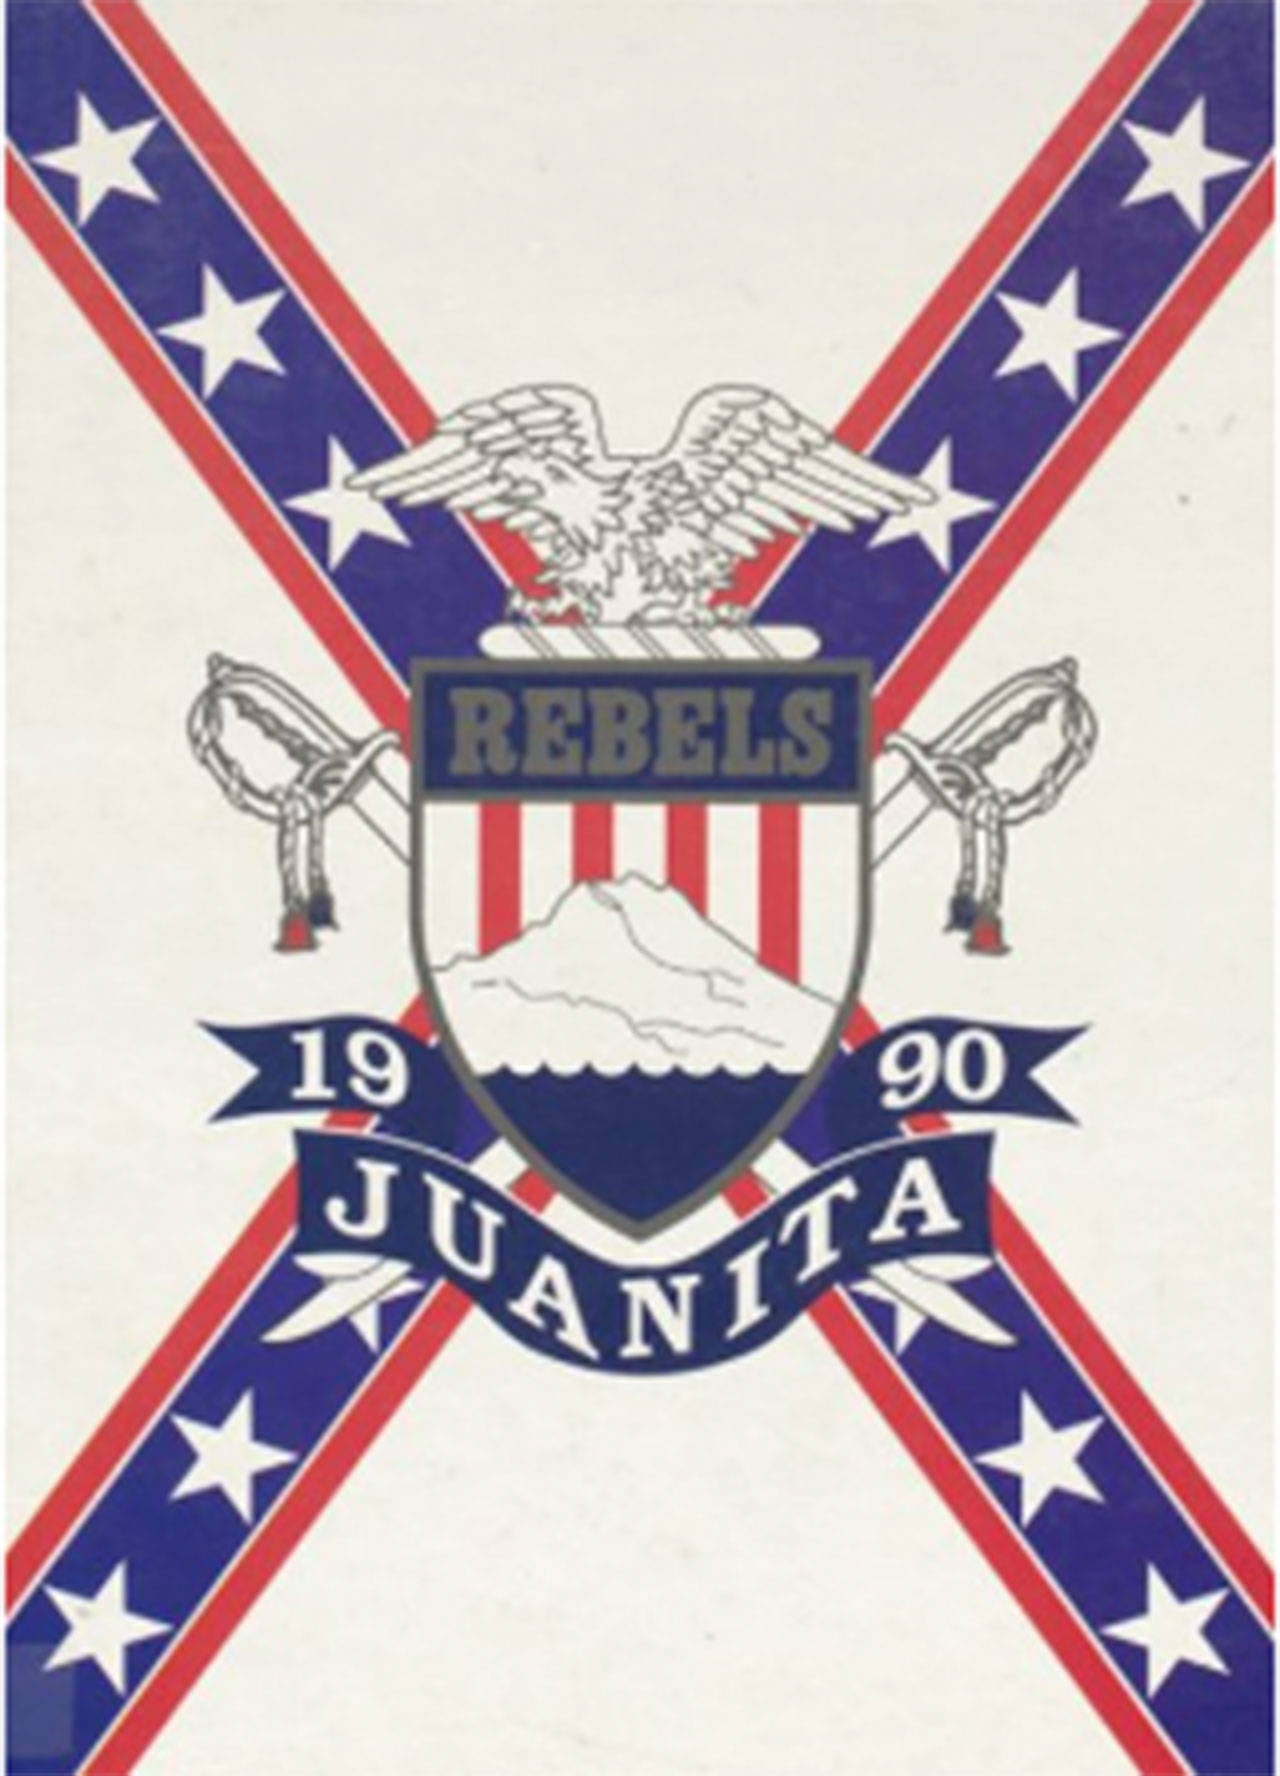 The 1990 Juanita High School logo featuring the “stars and bars” design in the background. The design is associated with the Confederate flag and was changed in the early 1990s after JHS staff voiced objections to it. Courtesy of Lake Washington School District